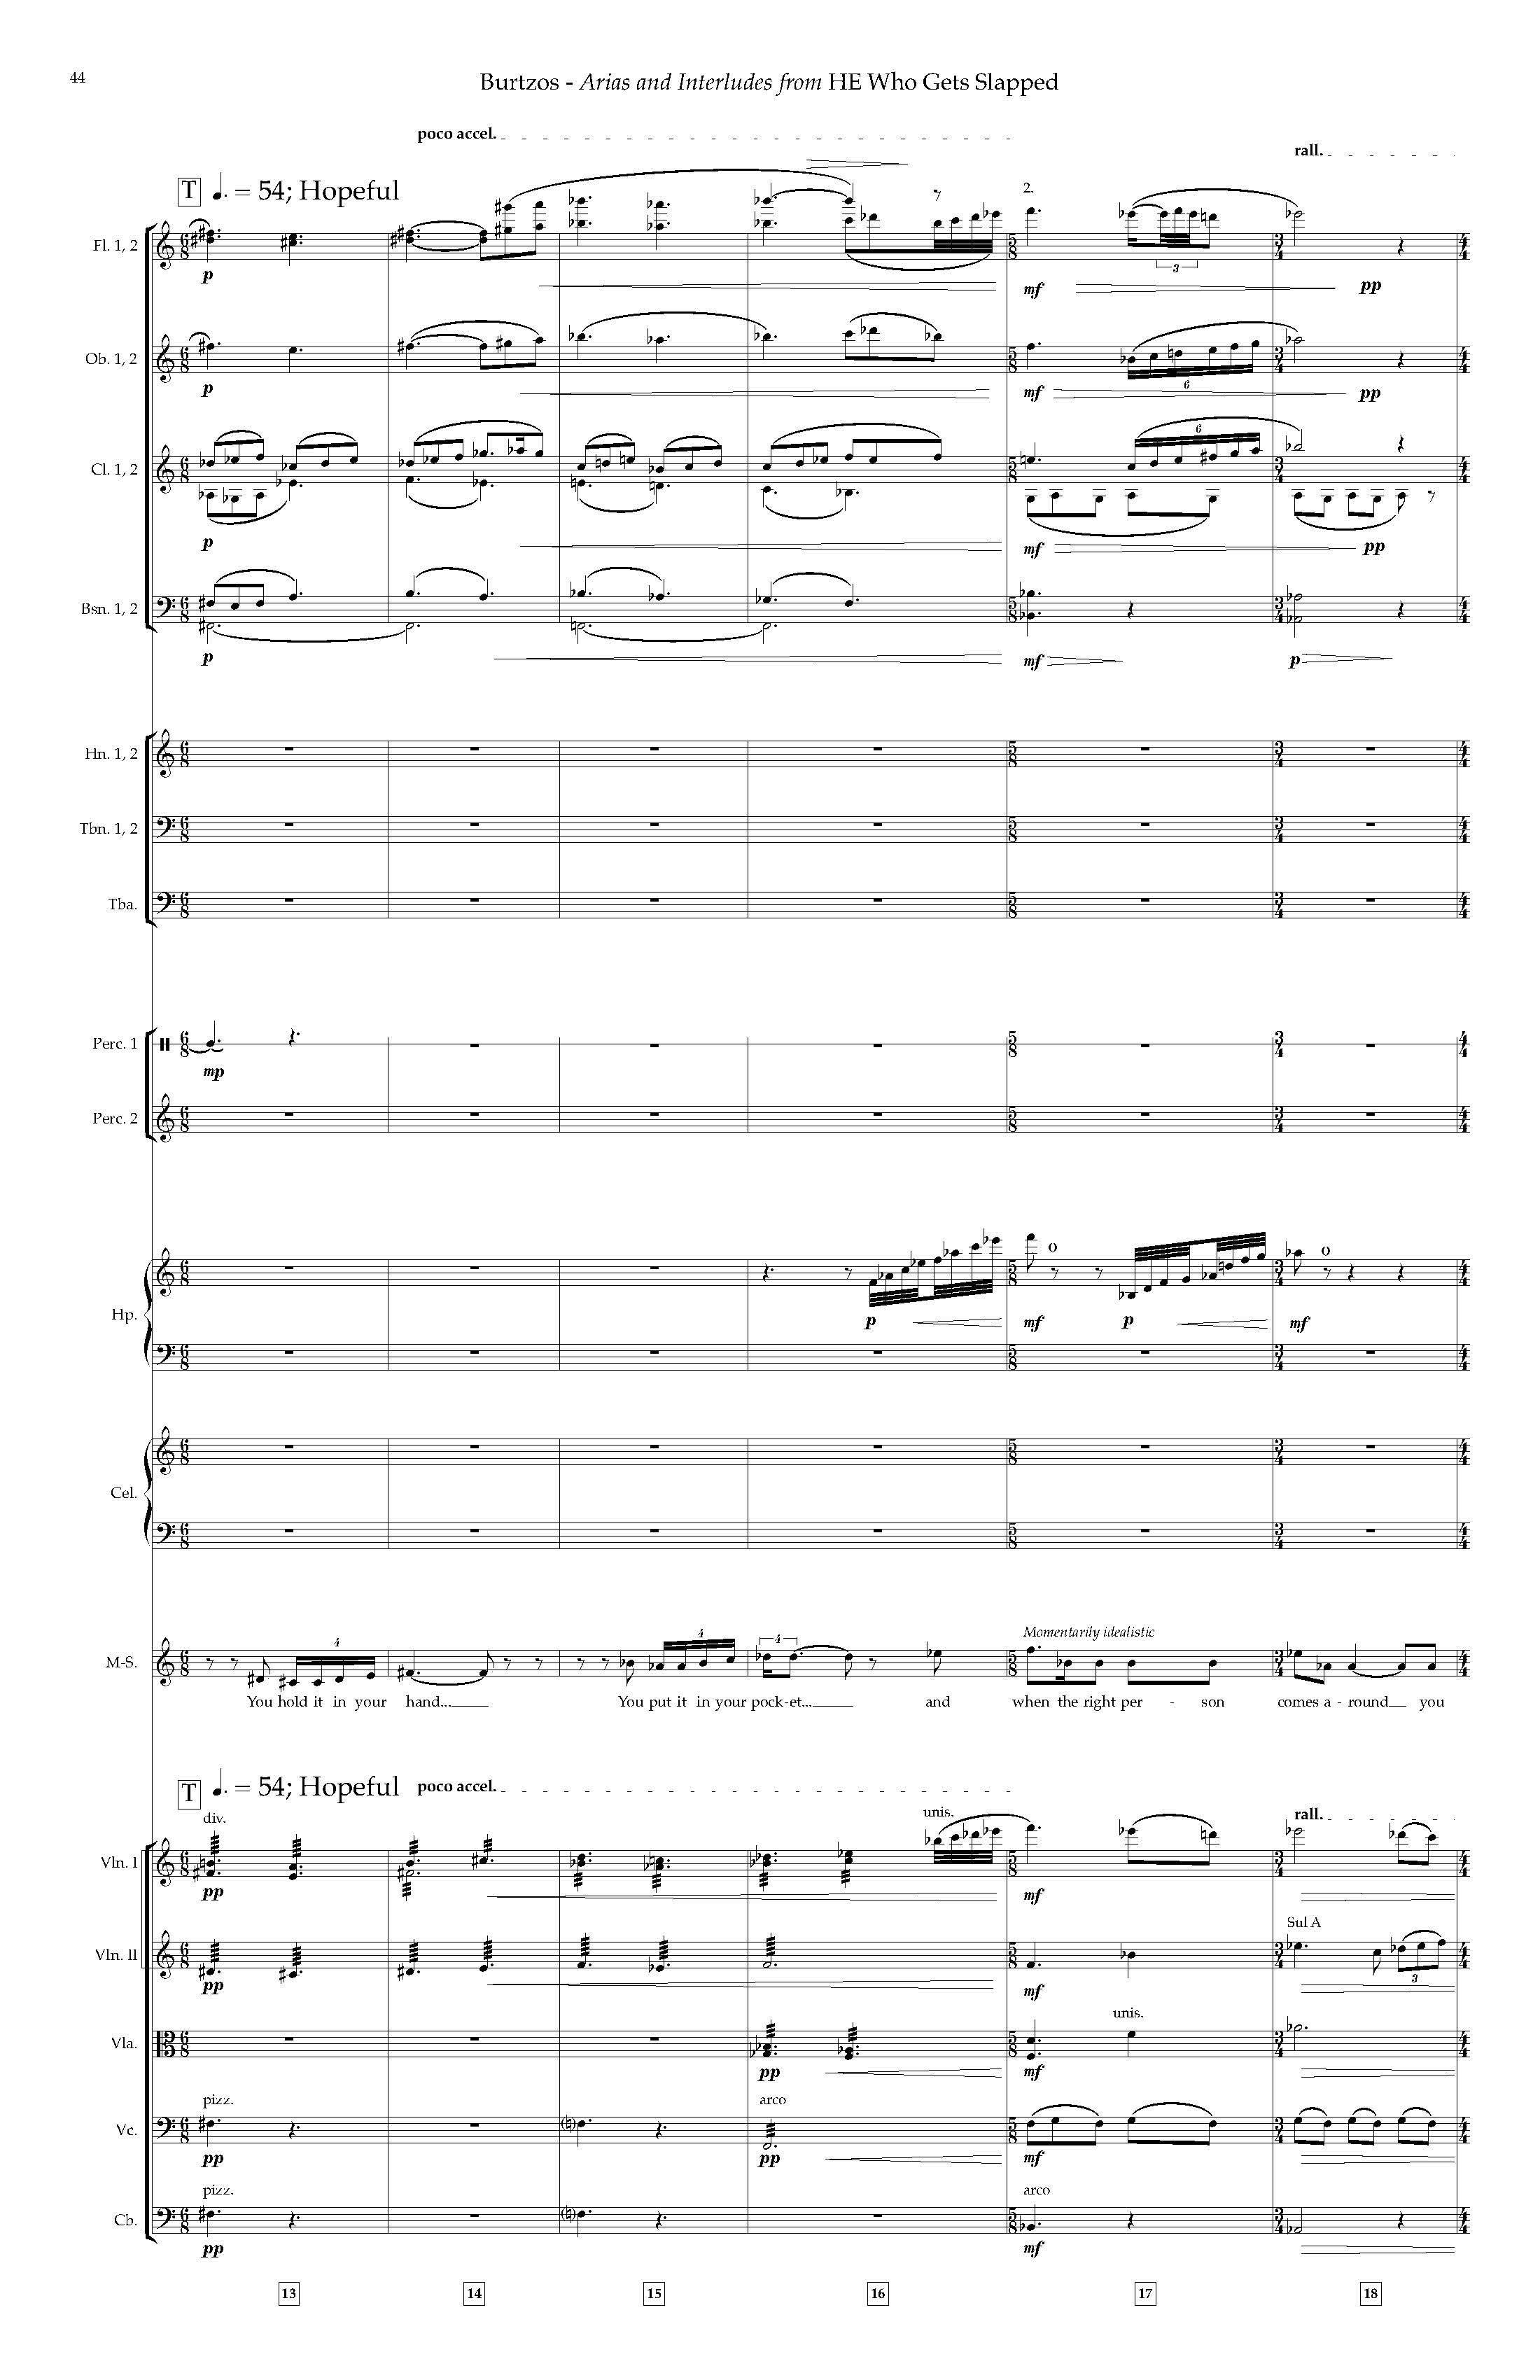 Arias and Interludes from HWGS - Complete Score_Page_50.jpg